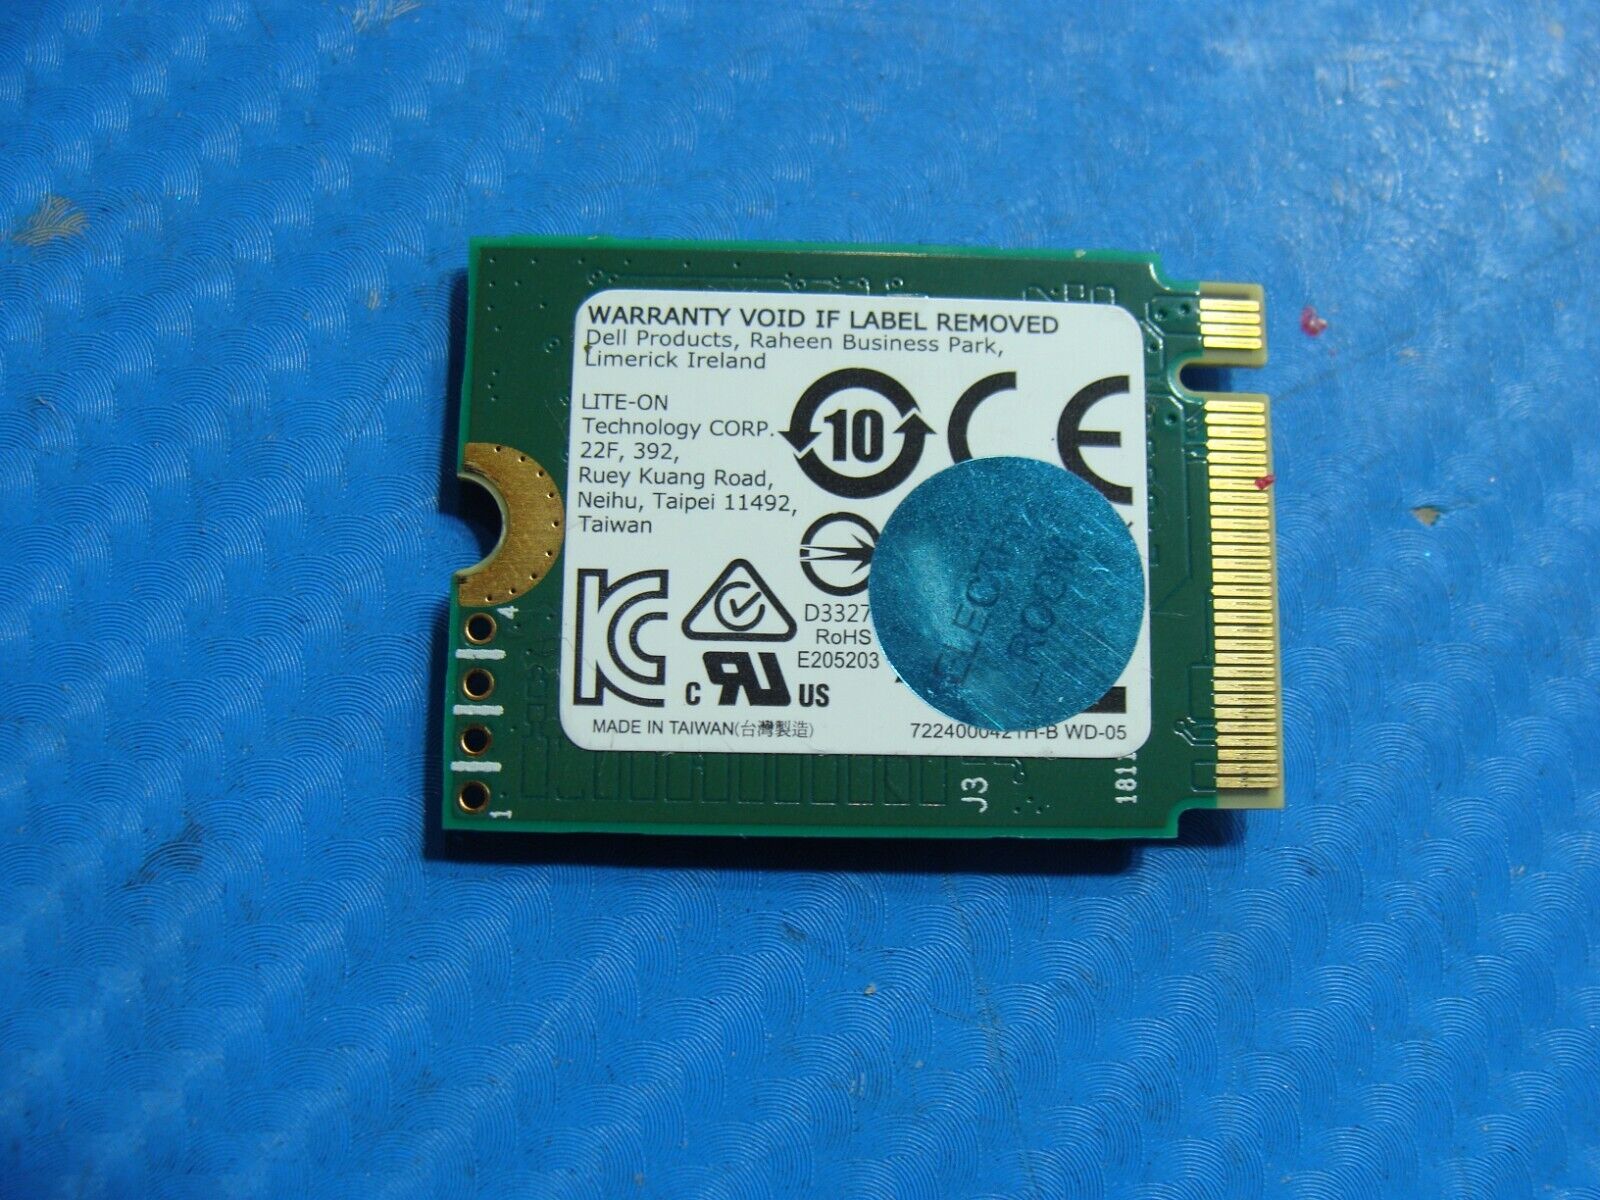 Dell 15 5590 LITE-ON 128GB M.2 NVMe SSD Solid State Drive CL1-3D128-Q11 R3CDK